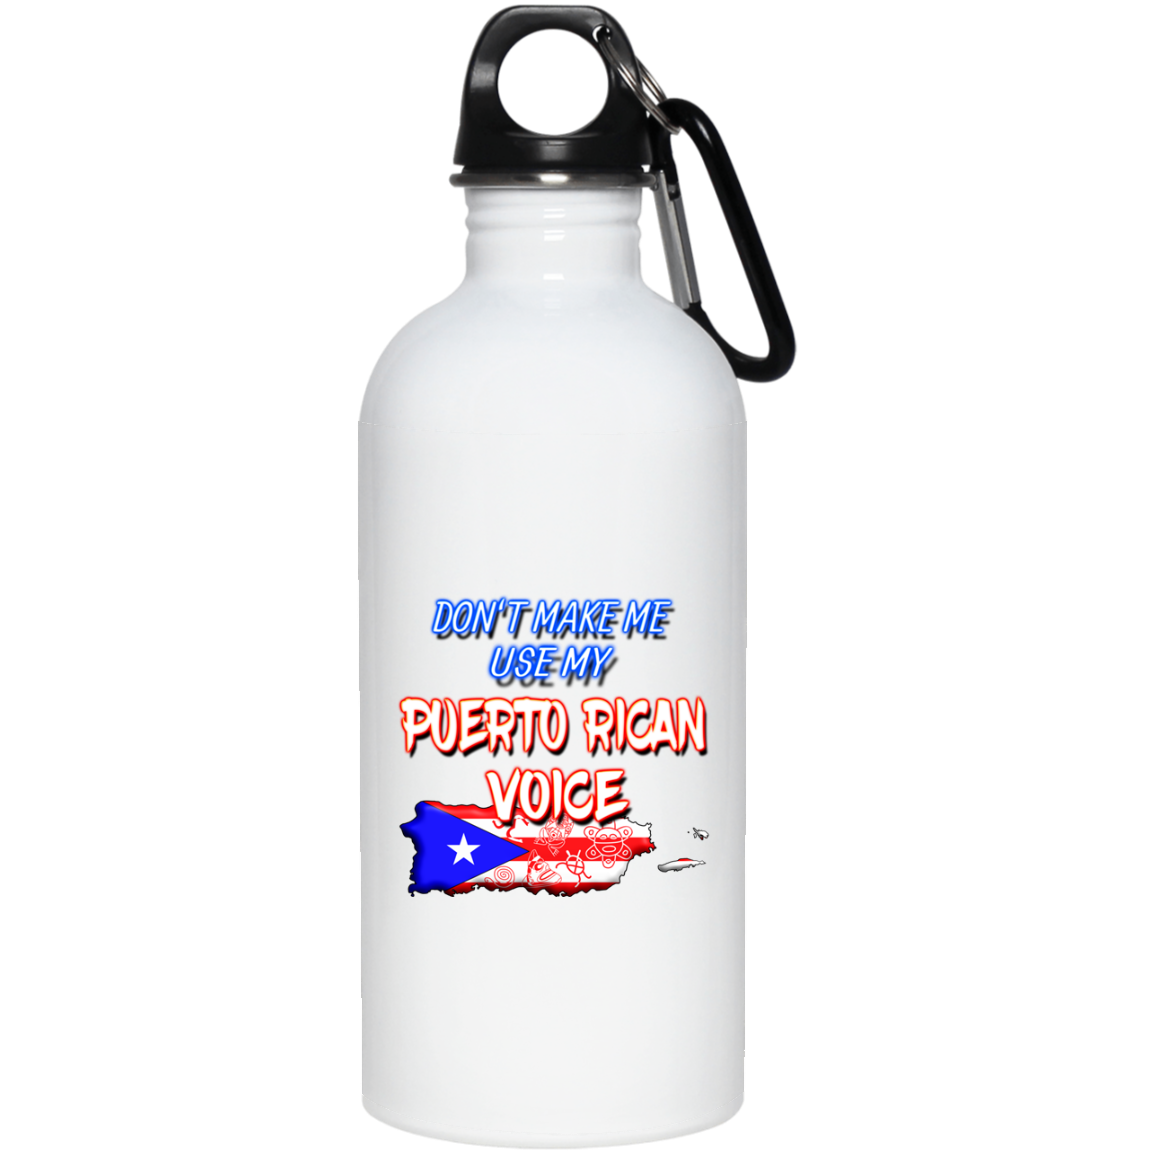 Don't Make Me Use My PR Voice 20 oz. Stainless Steel Water Bottle